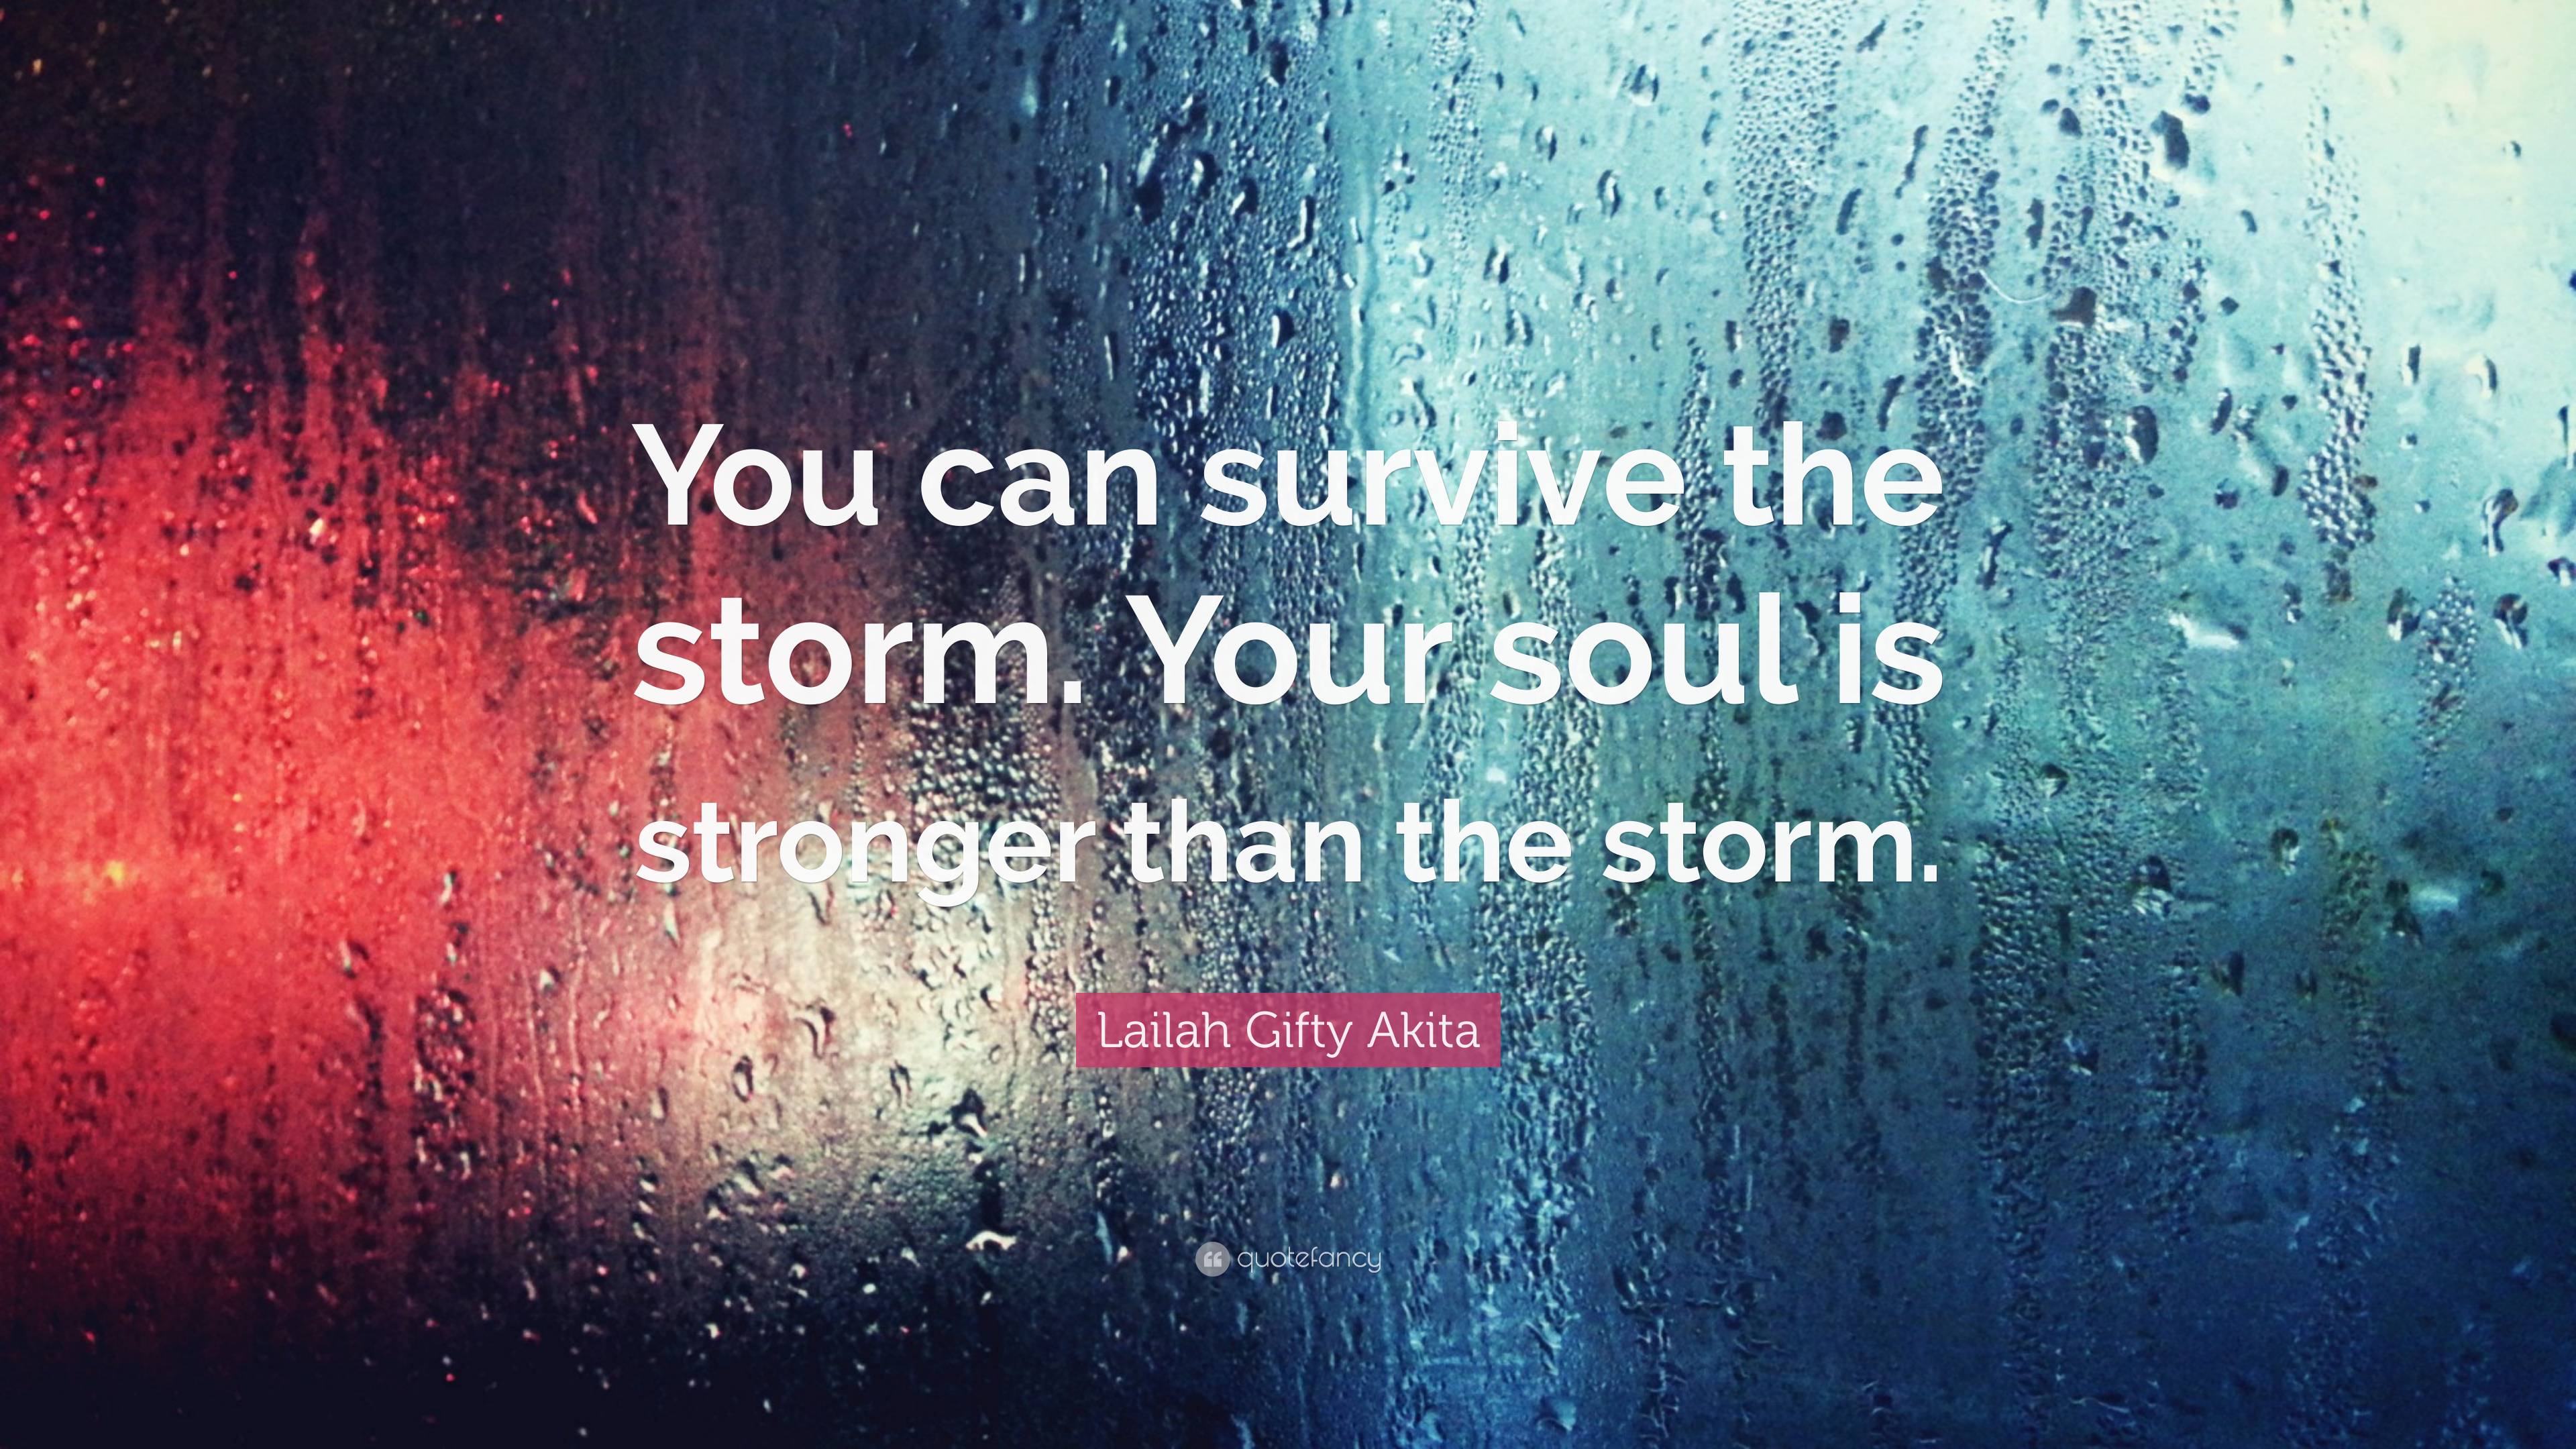 Lailah Gifty Akita Quote: “You can survive the storm. Your soul is ...